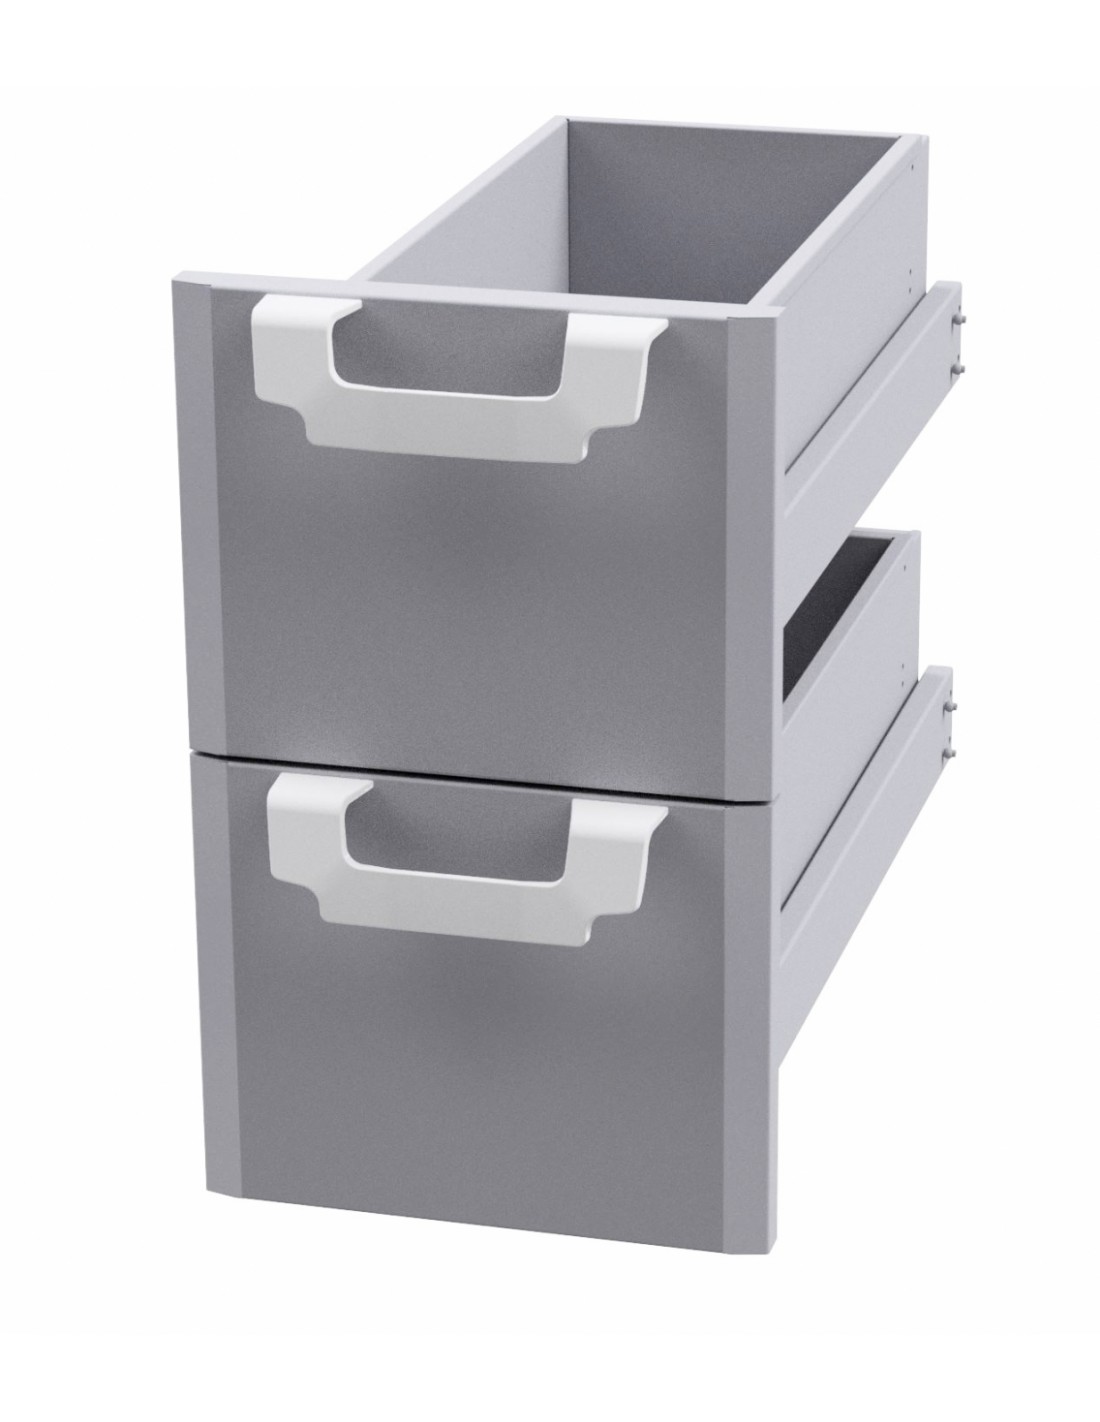 Chest of drawers 300/400/600 - N. 2 drawers with stainless steel tub Telescopic guides - Dimensions cm. 39.5x 51x 47.5h